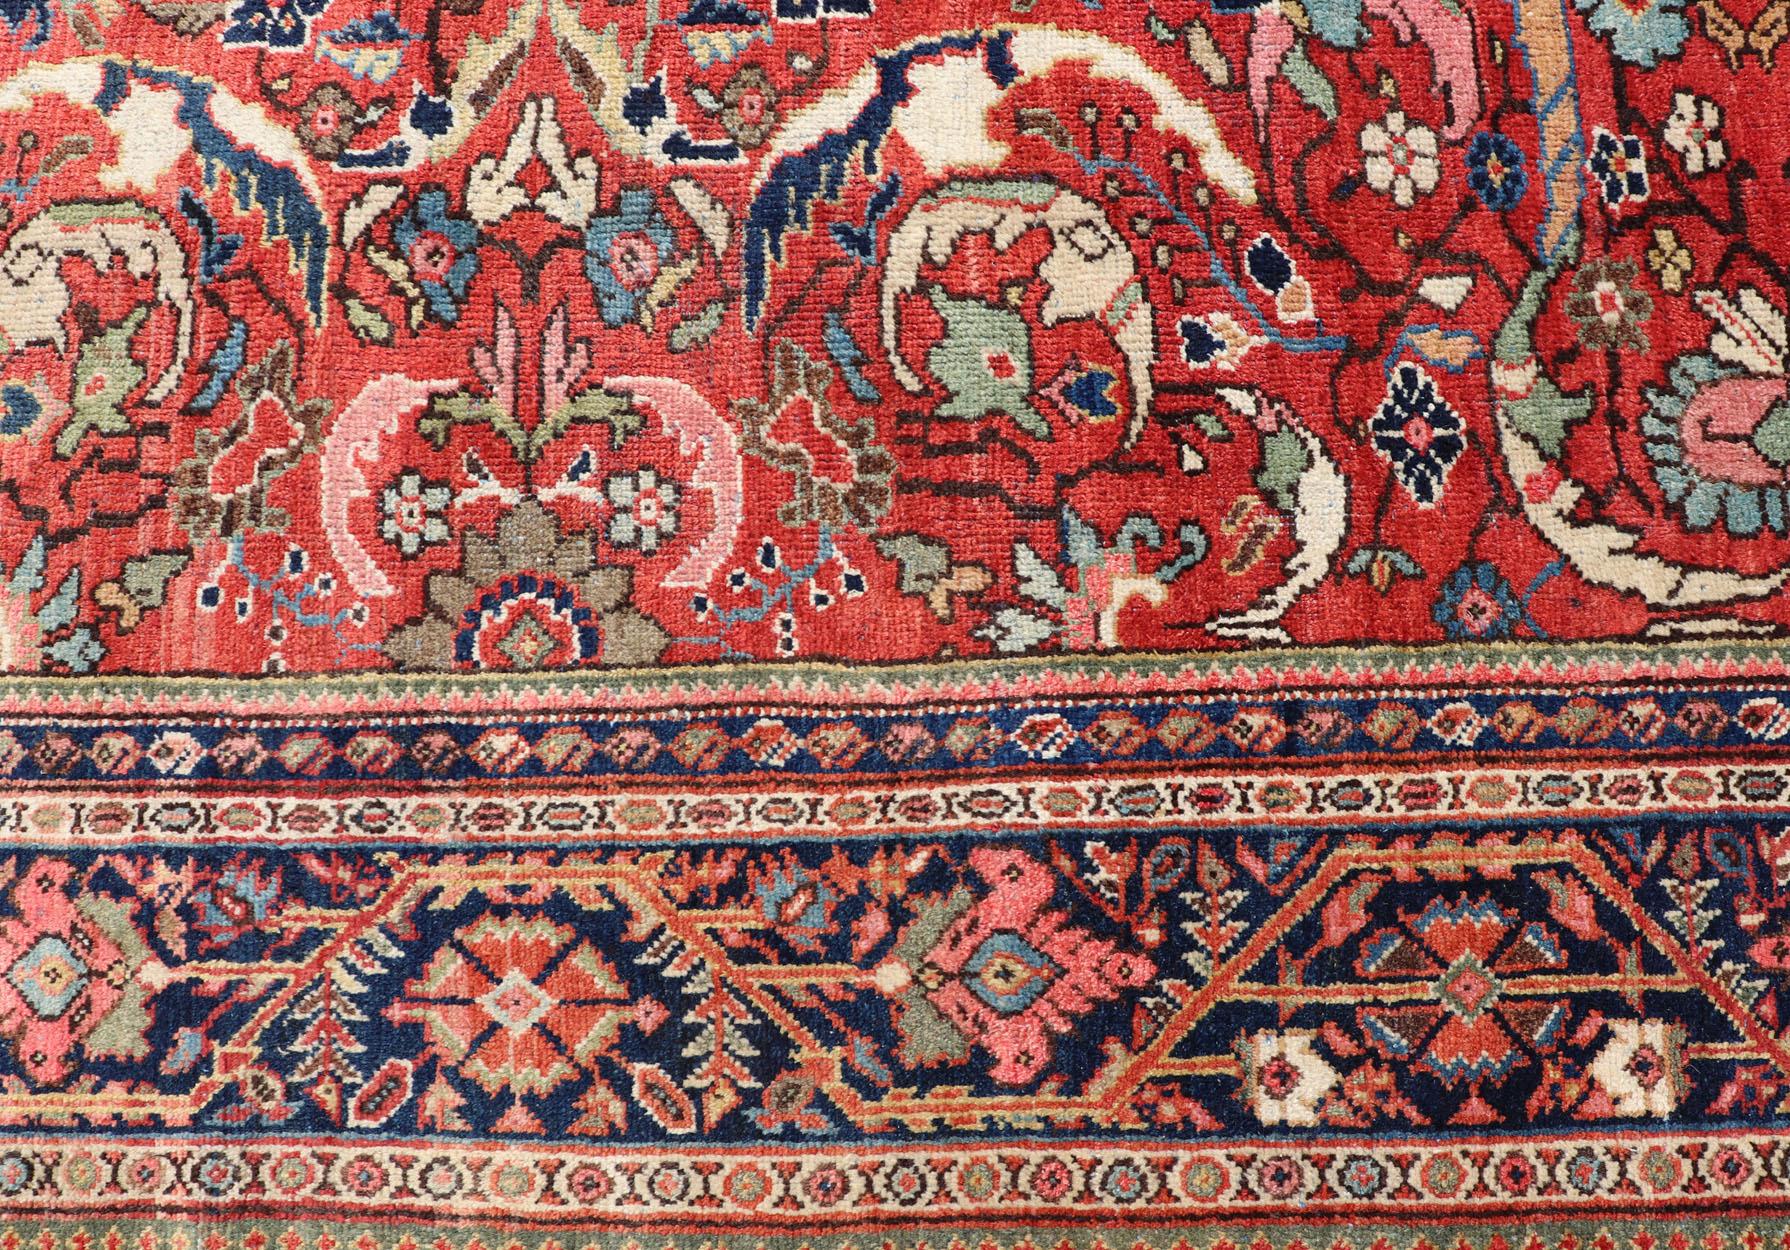 Colorful Antique Persian Mahal/Sultanabad Rug with All-Over Floral Design  In Good Condition For Sale In Atlanta, GA